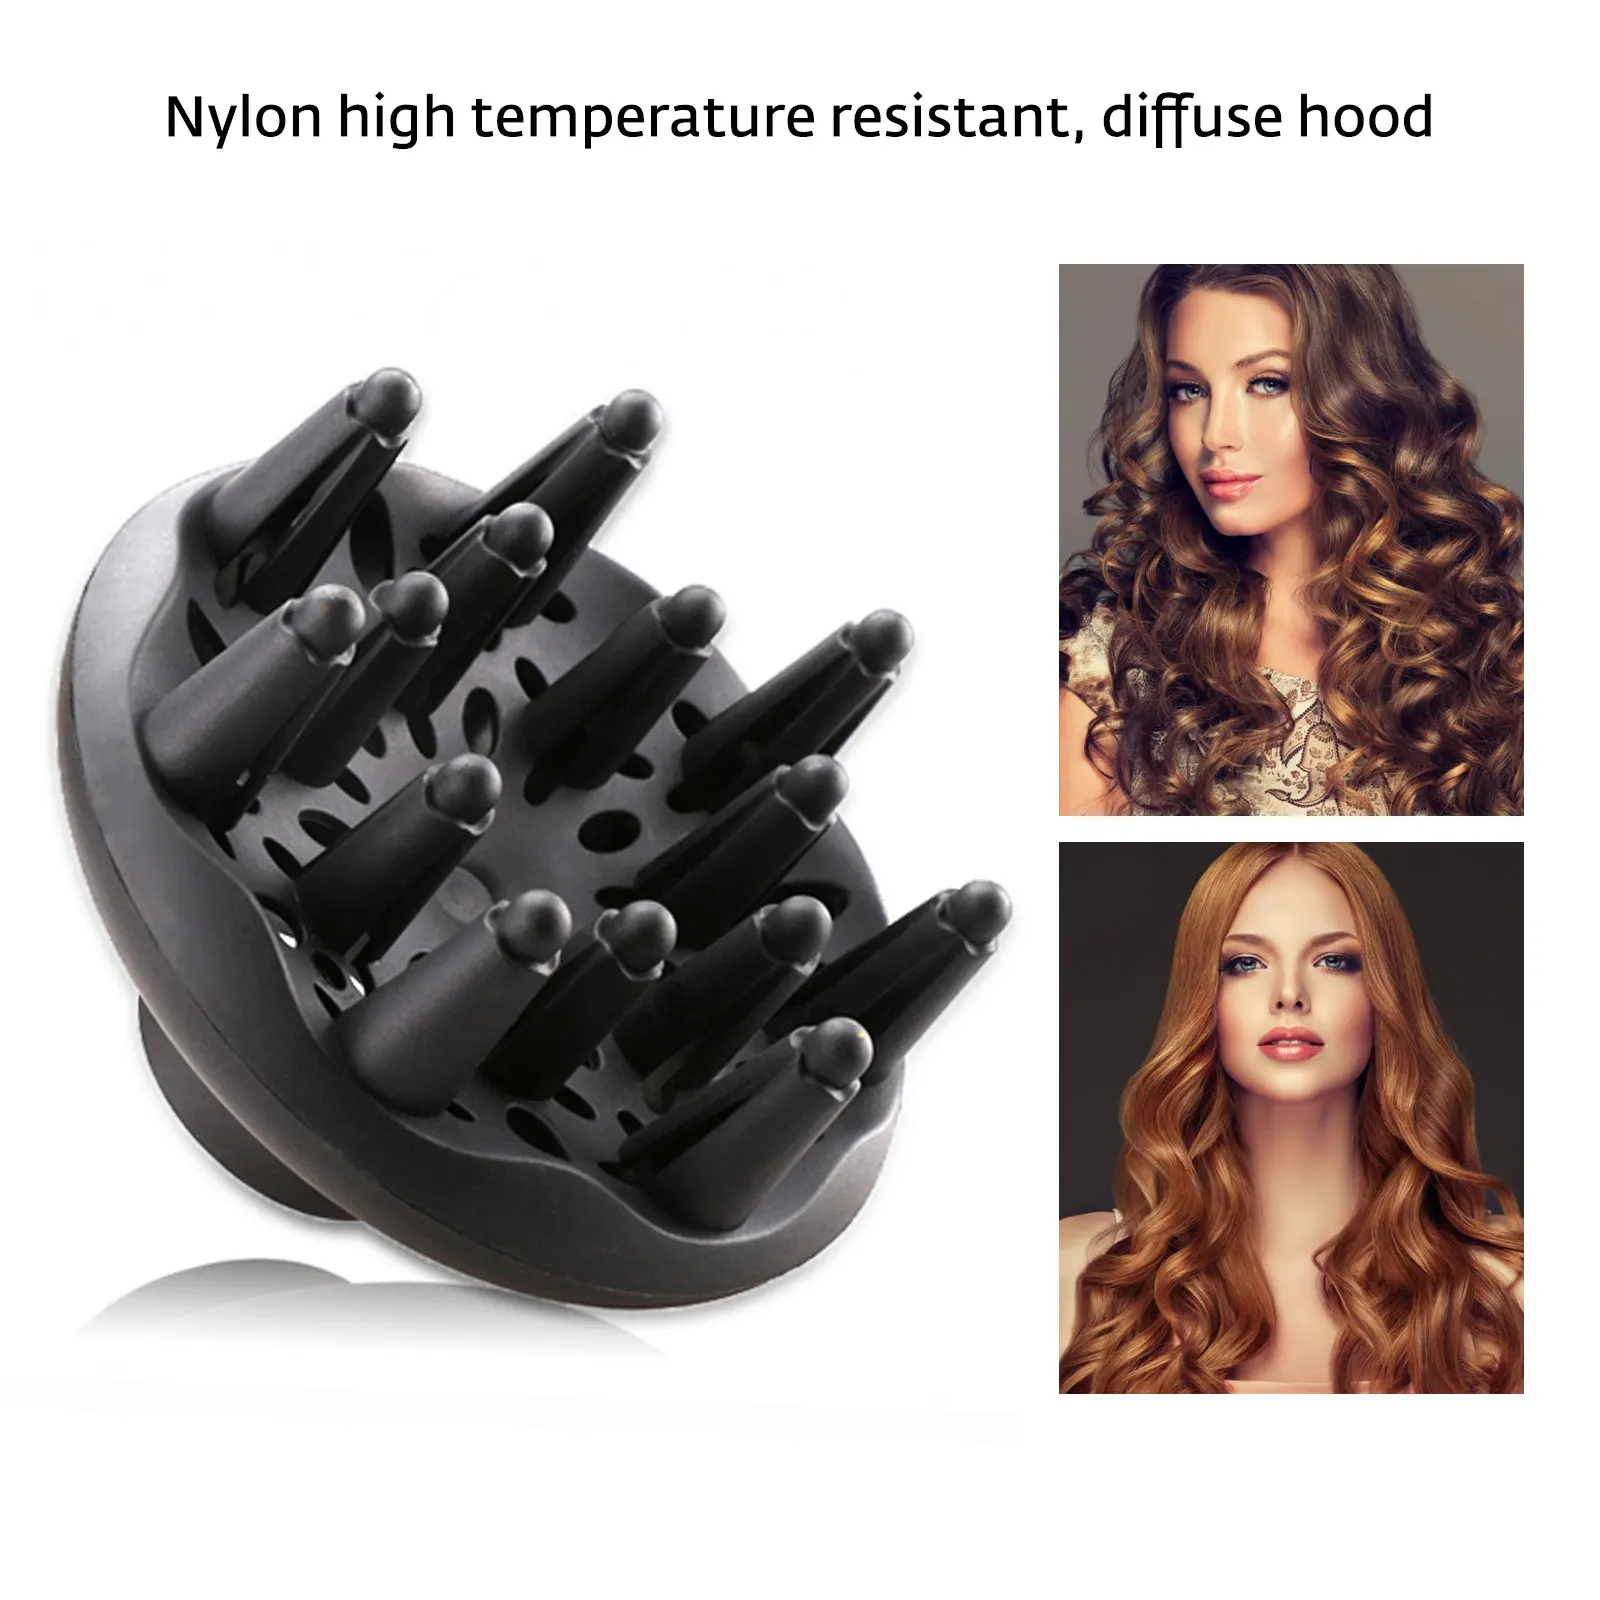 1pc Hair Diffuser Professional Hair Styling Curl Dryer Diffuser Universal Hairdressing Blower Styling Salon Curly Tool Black